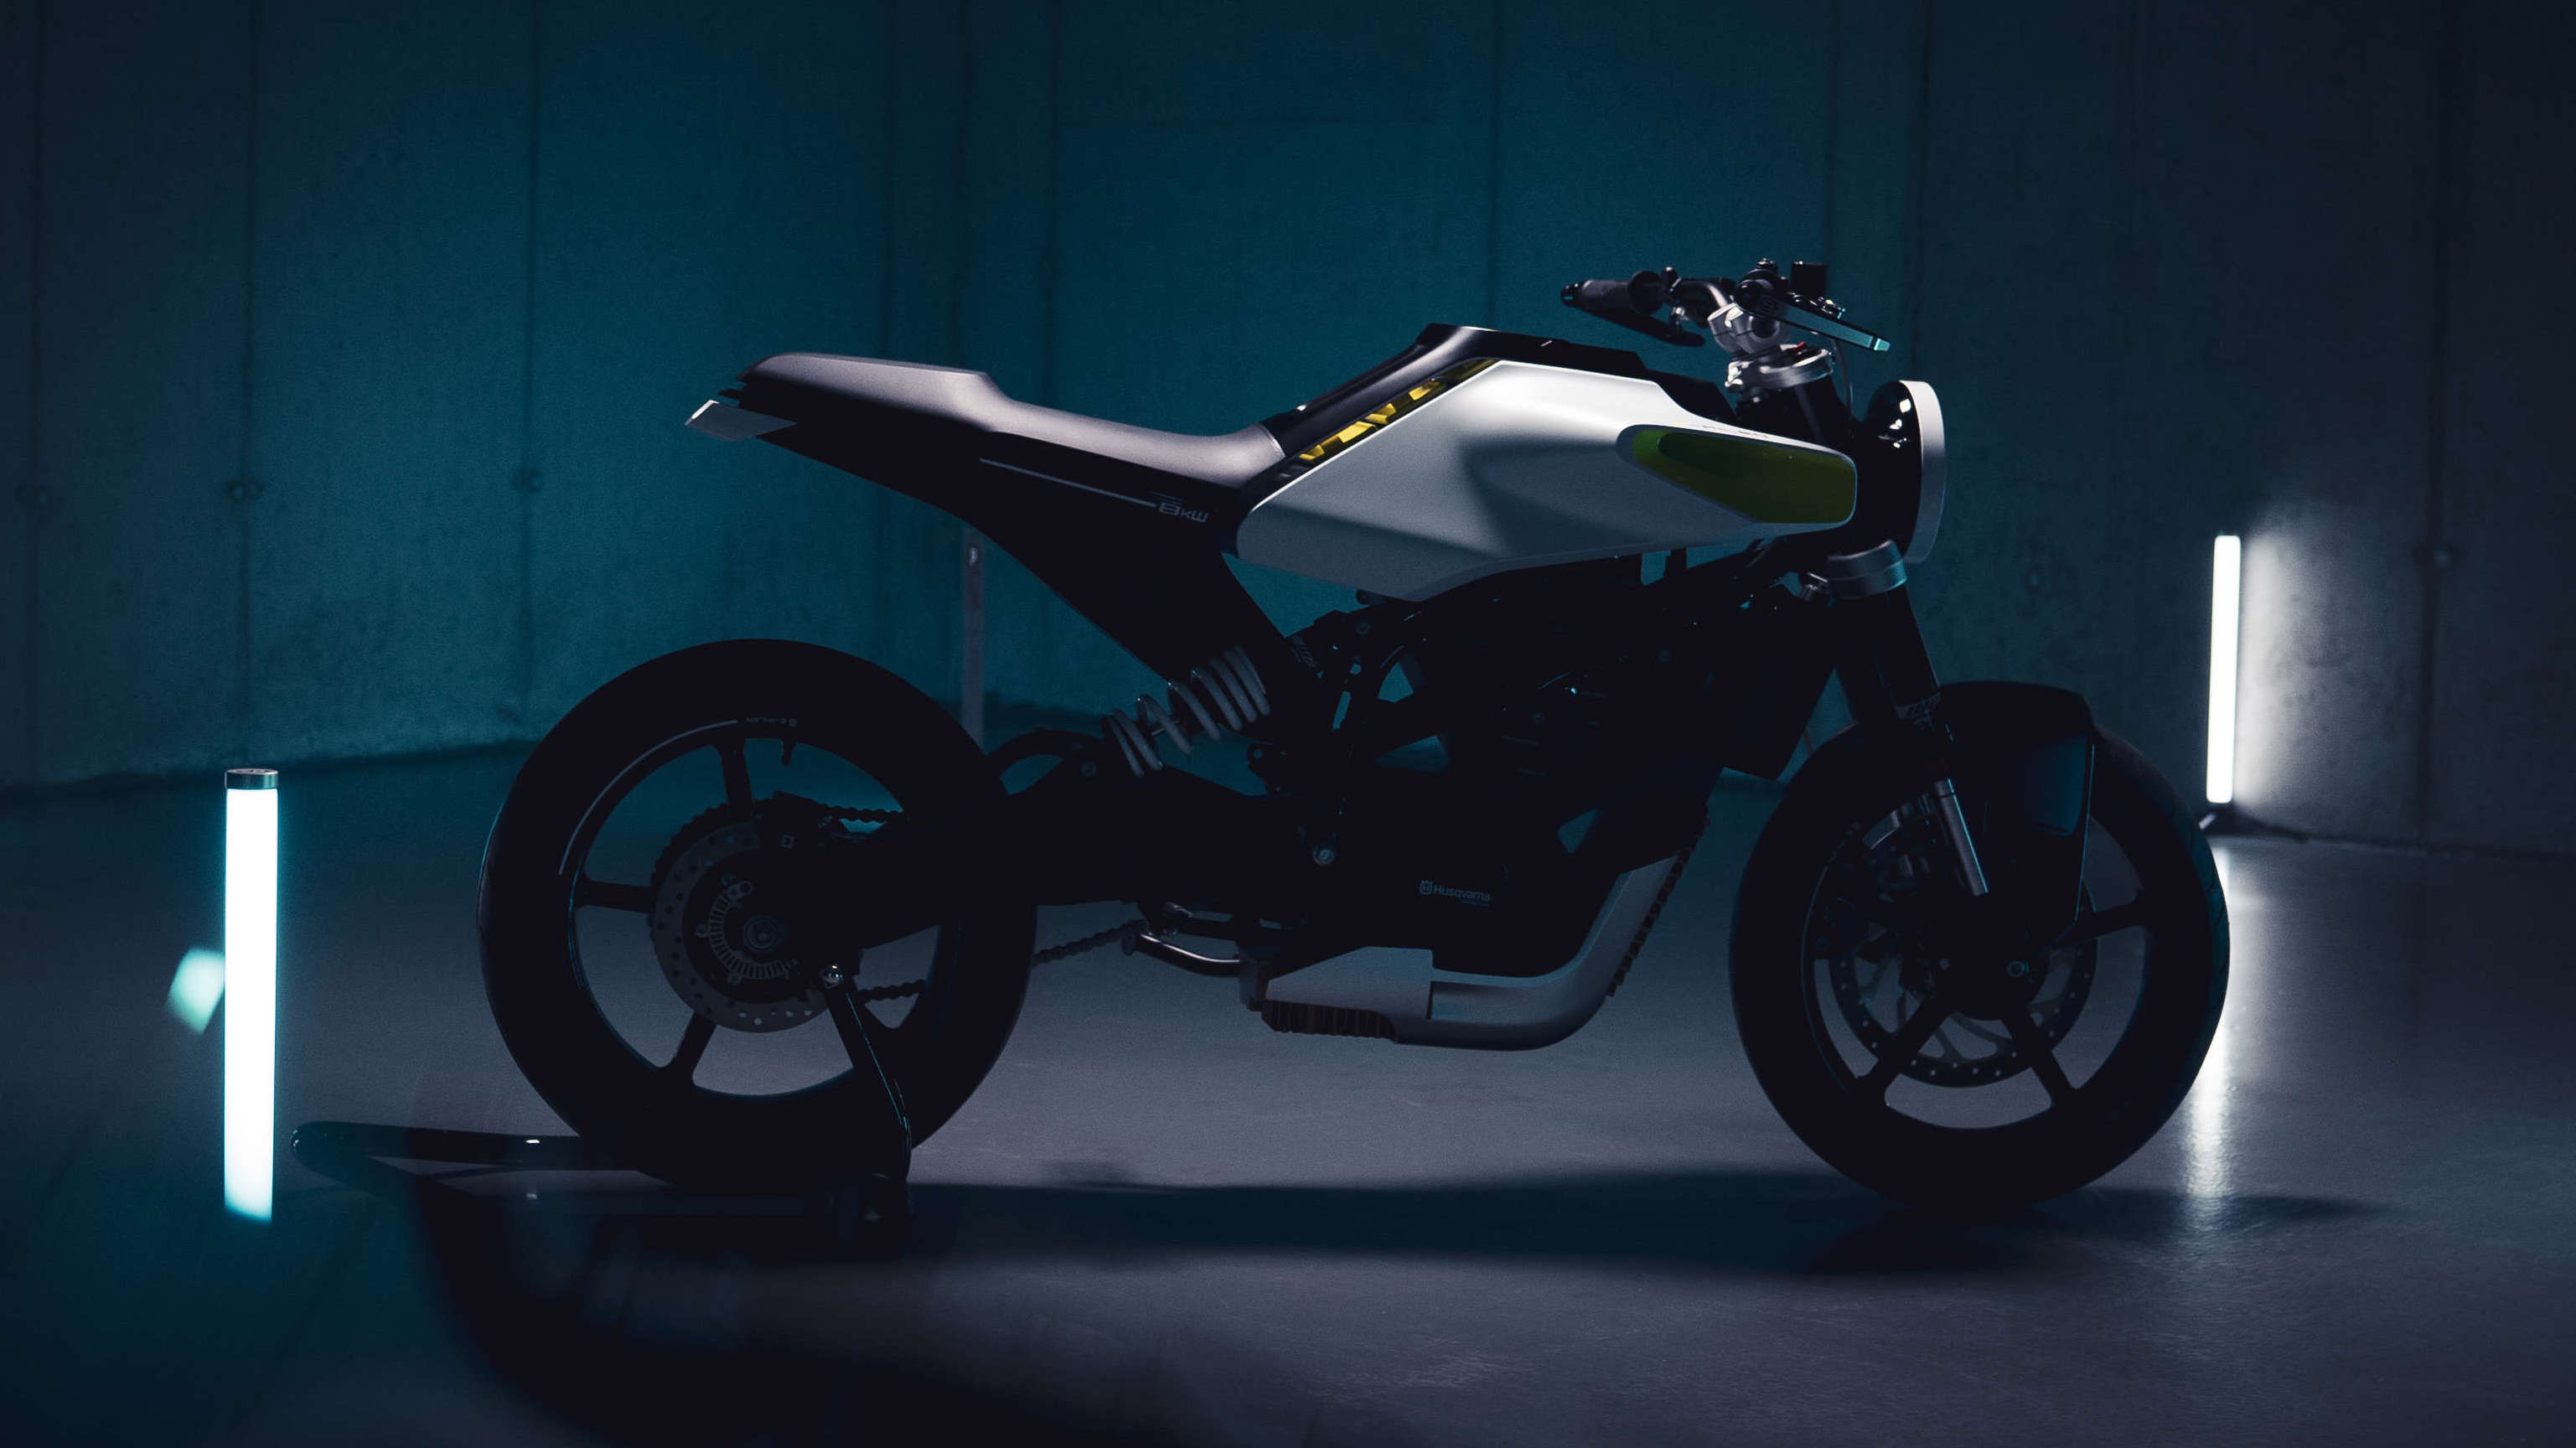 Husqvarna Has Already Built Its First Electric Bike With Removable Batteries